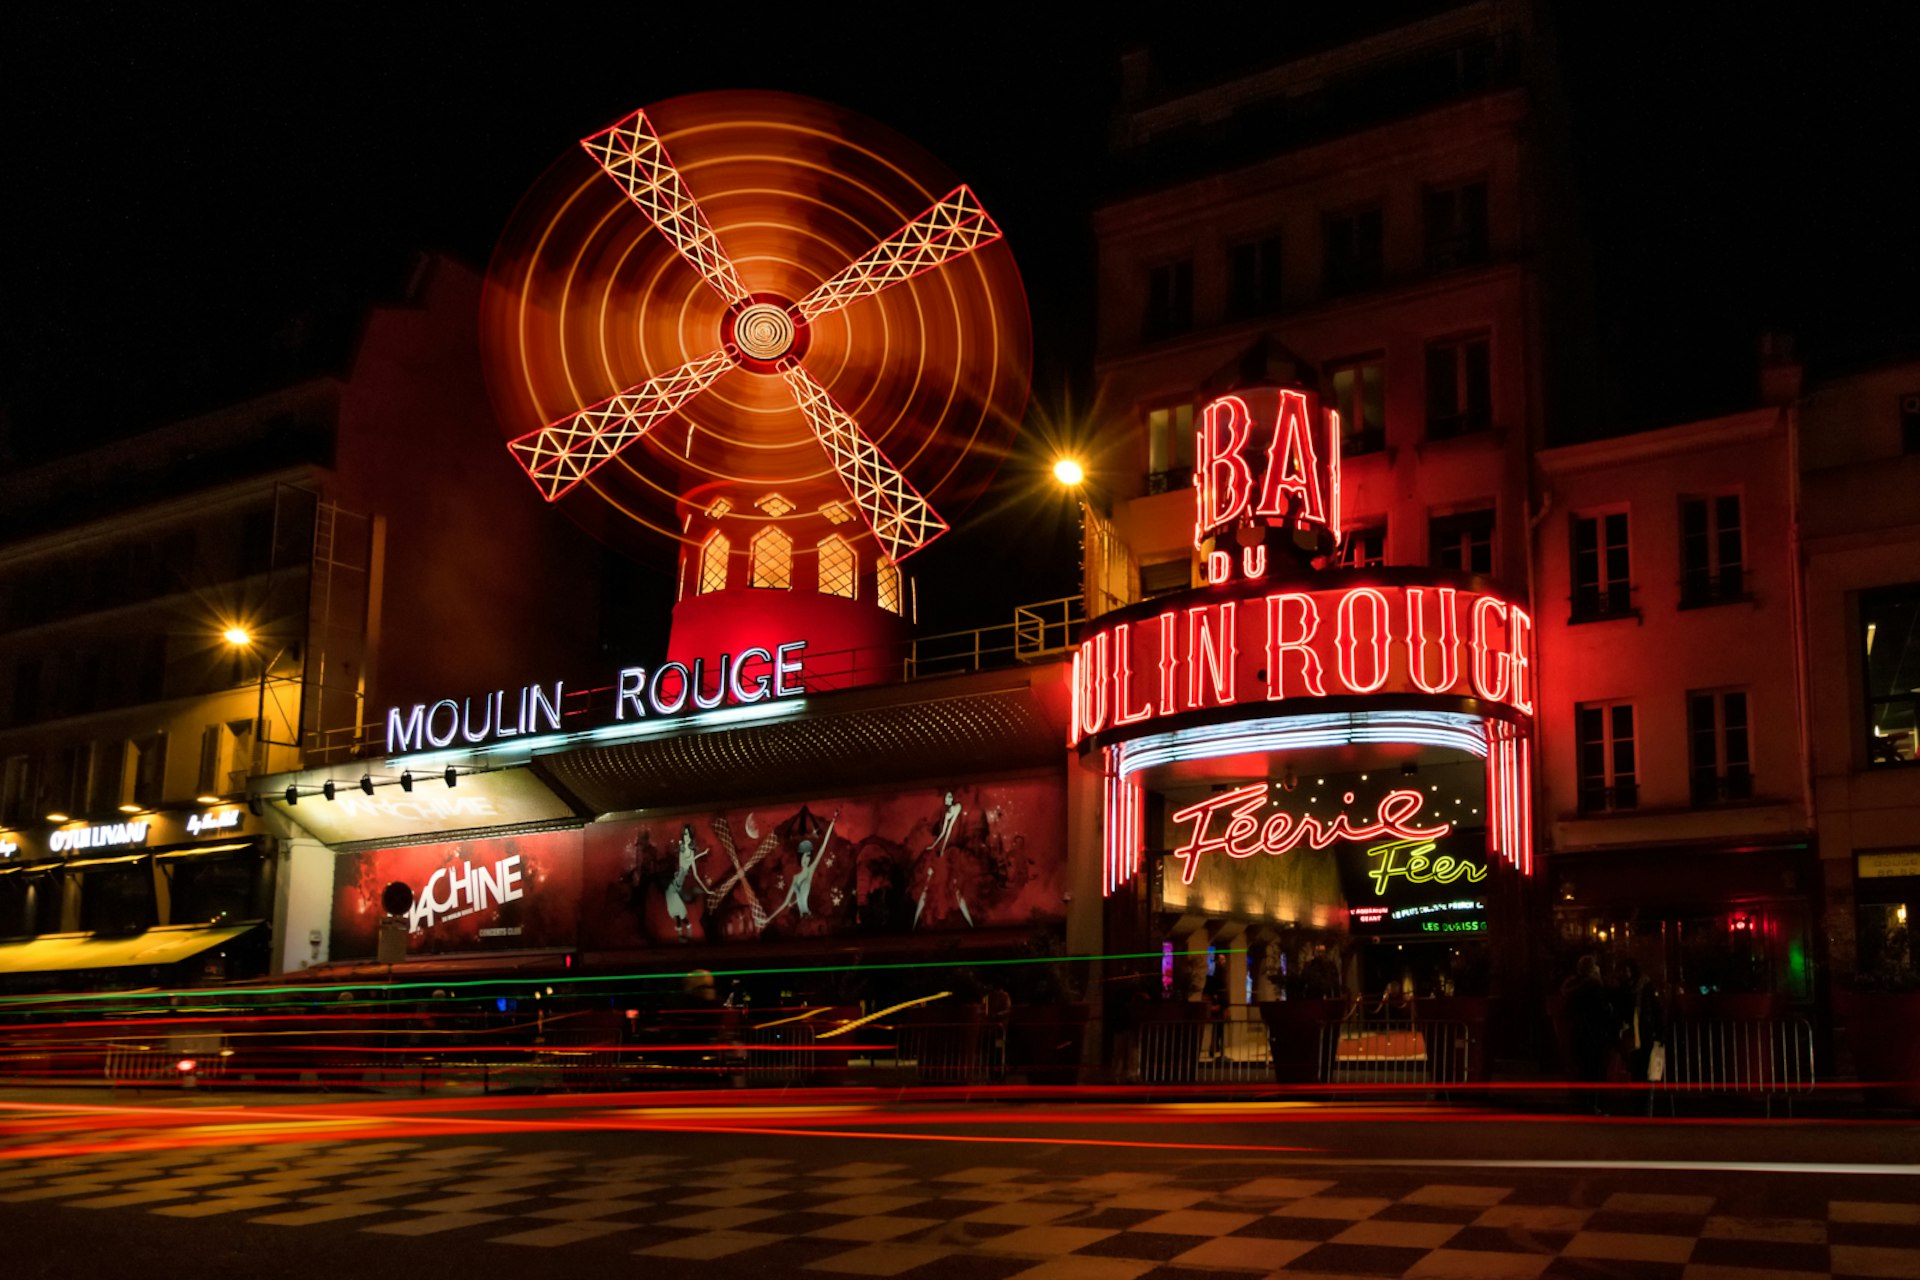 Bathed in red light, the famous windmill in front of the Moulin Rouge cabaret club in Paris spins at night time